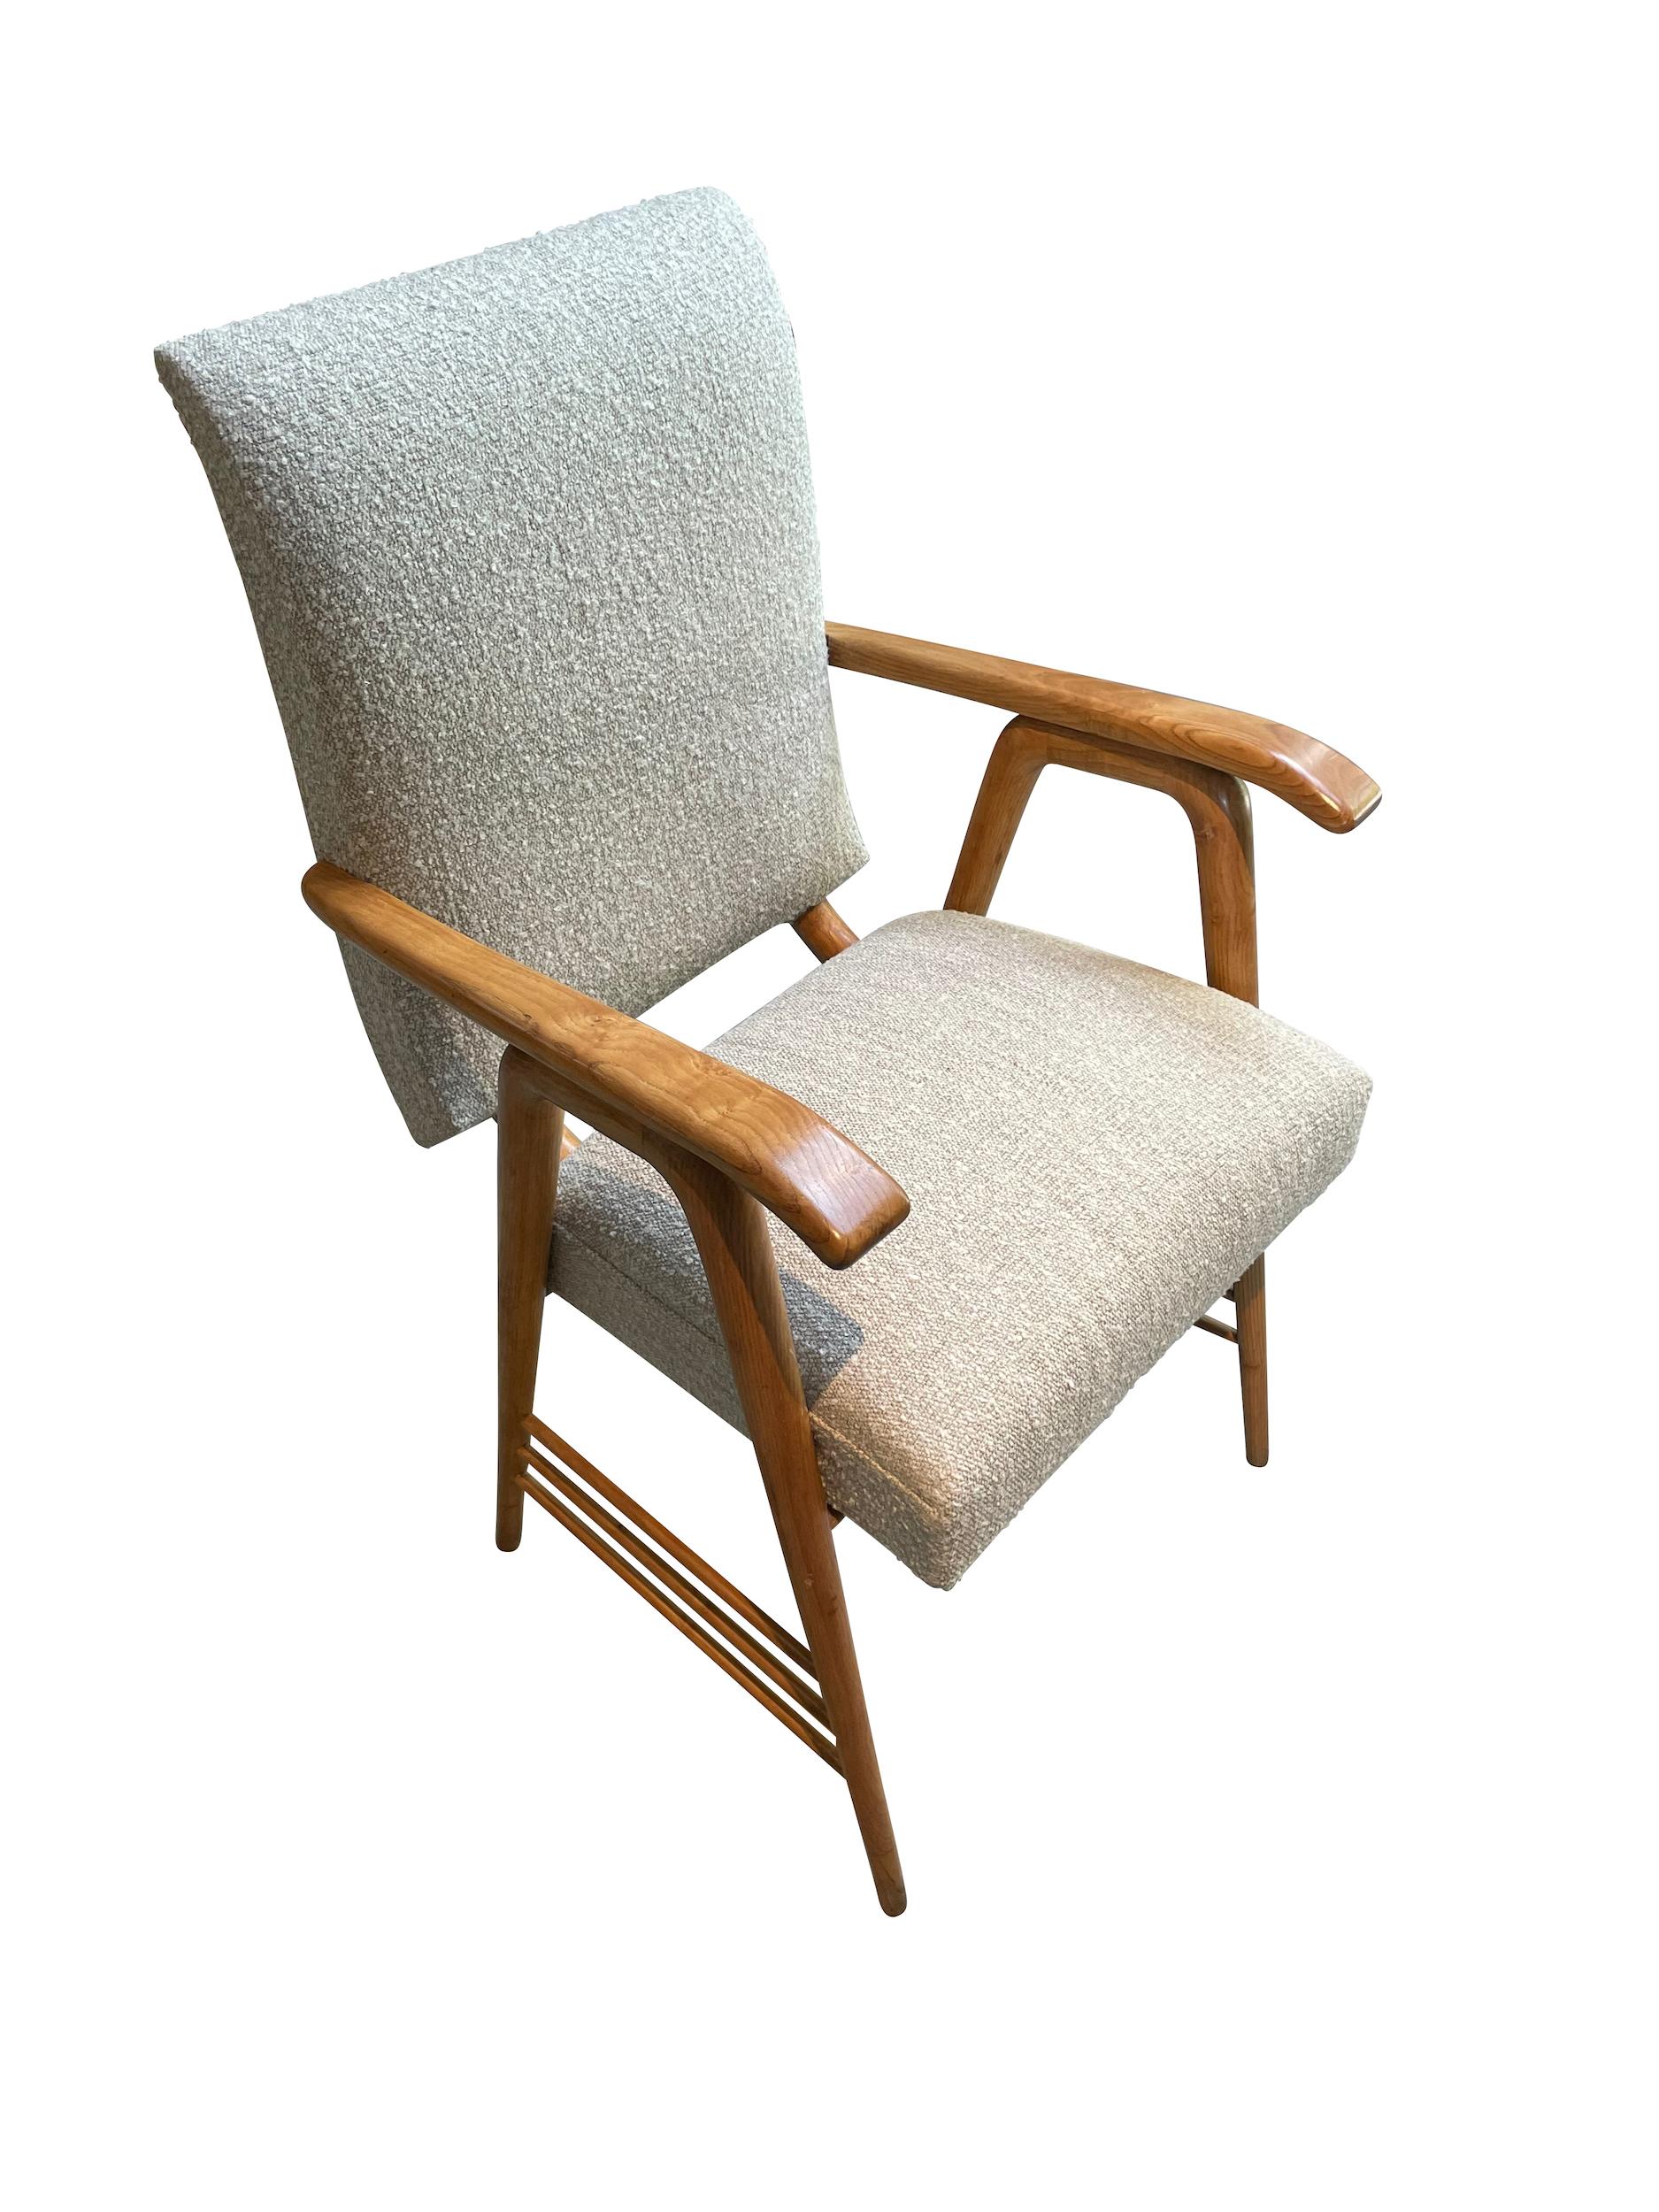 1940's Italian desk chair in the style of Gio Ponti.
Blond ash.
Slight curved back.
Compass design legs.
Newly reupholstered in boucle.
